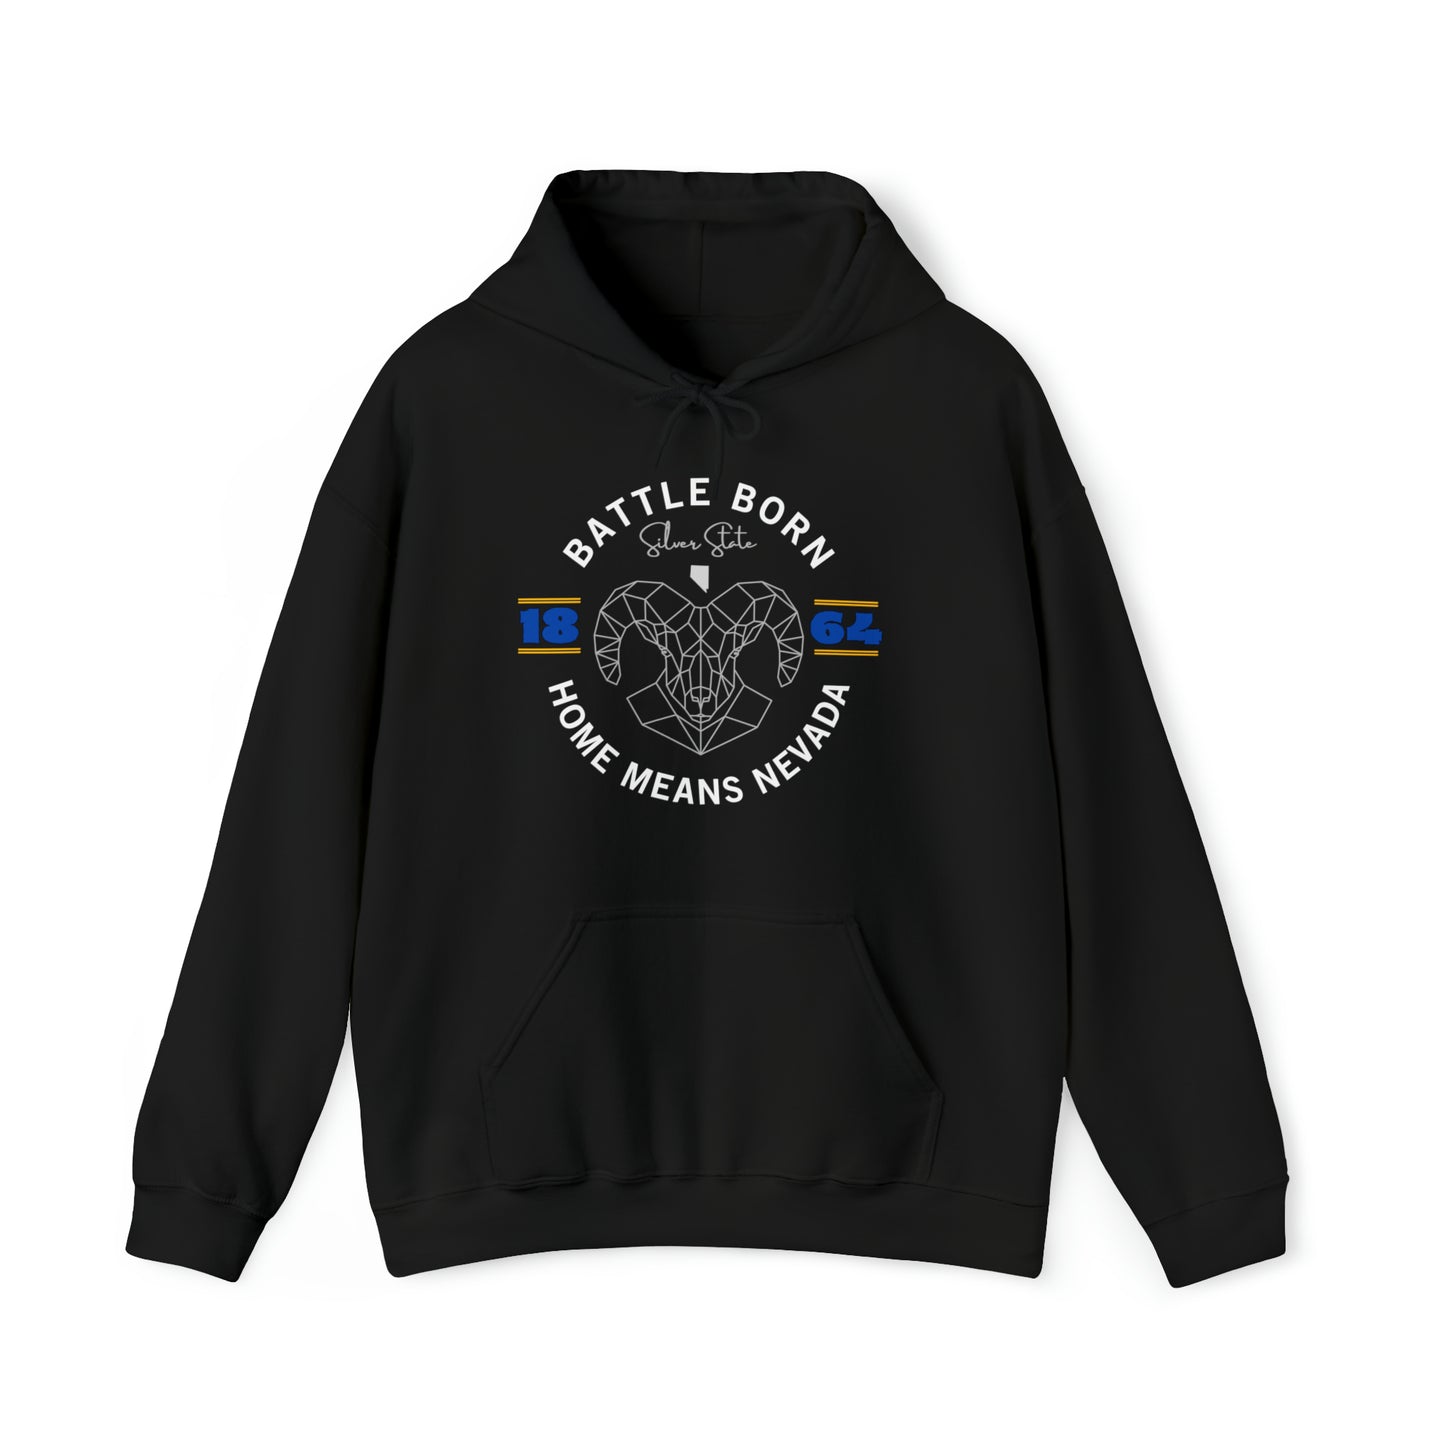 Battle Born Hoodie | Home Means Nevada | Nevada Proud